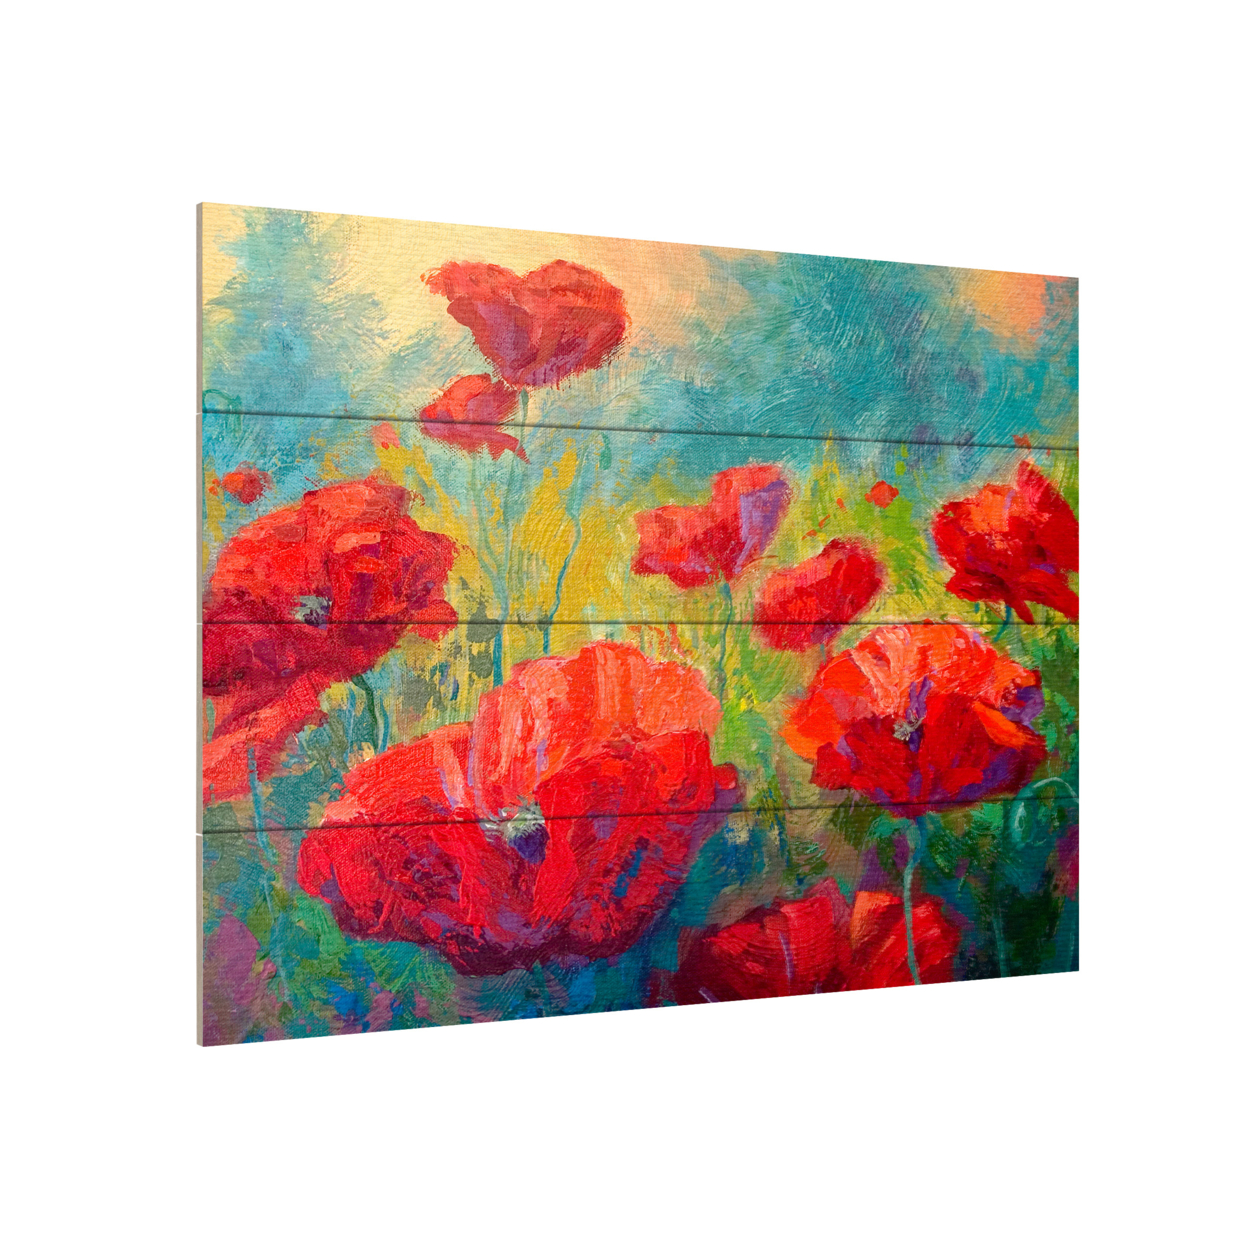 Wall Art 12 X 16 Inches Titled Field Of Poppies Ready To Hang Printed On Wooden Planks